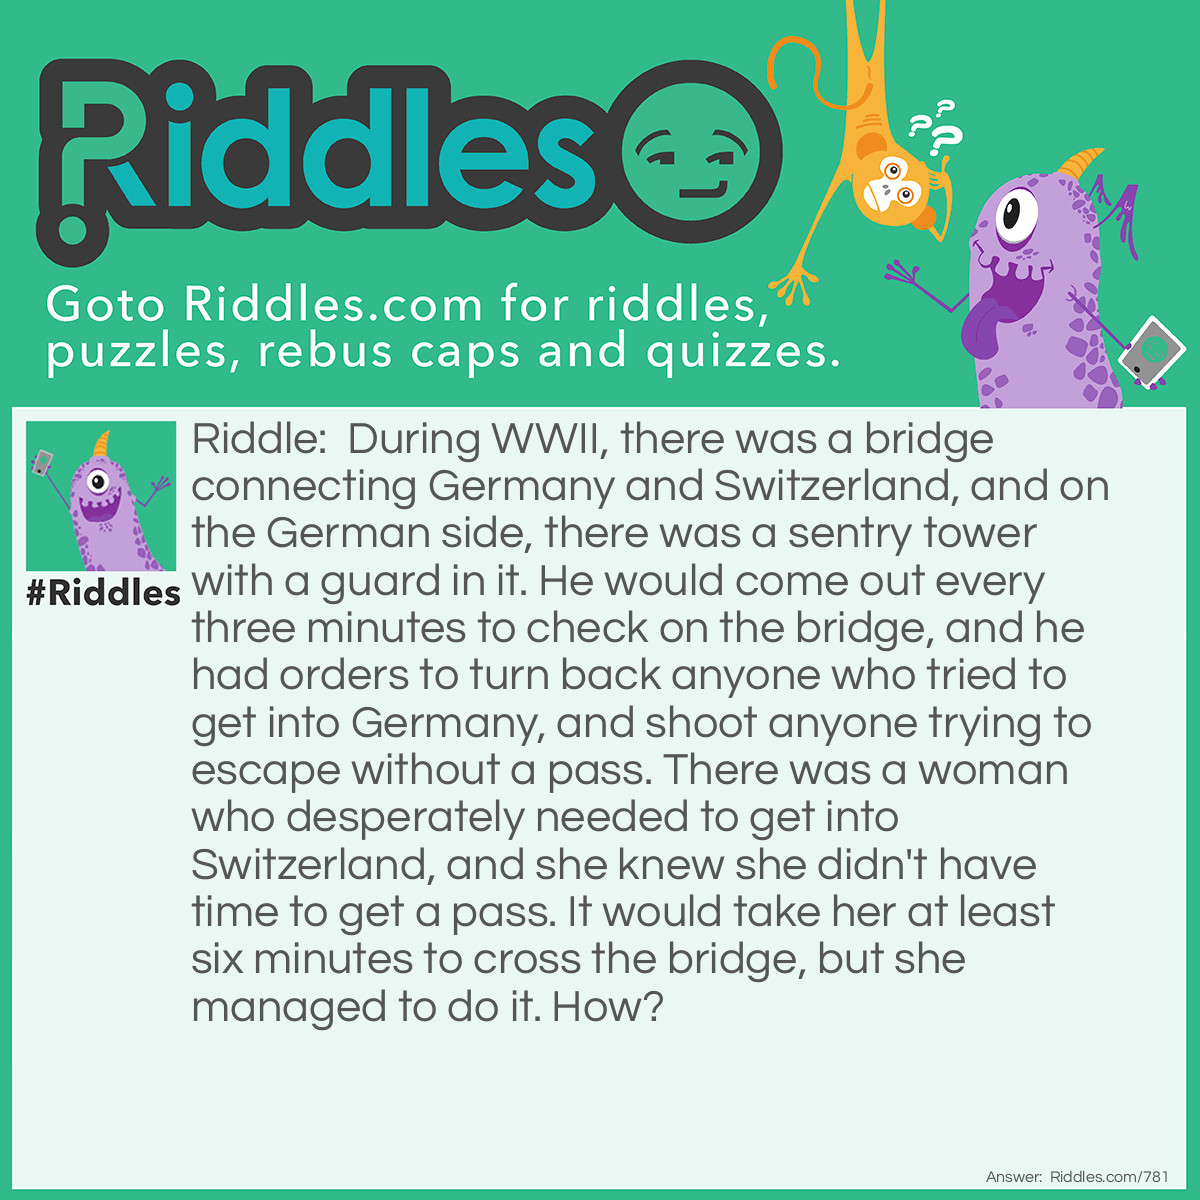 Riddle: During WWII, there was a bridge connecting Germany and Switzerland, and on the German side, there was a sentry tower with a guard in it. He would come out every three minutes to check on the bridge, and he had orders to turn back anyone who tried to get into Germany, and shoot anyone trying to escape without a pass. There was a woman who desperately needed to get into Switzerland, and she knew she didn't have time to get a pass. It would take her at least six minutes to cross the bridge, but she managed to do it. How? Answer: When the sentry went into the tower, she would start to cross into Switzerland, and when he came out, she would start to walk back into Germany. When he saw her, he would tell her to turn back into Switzerland.